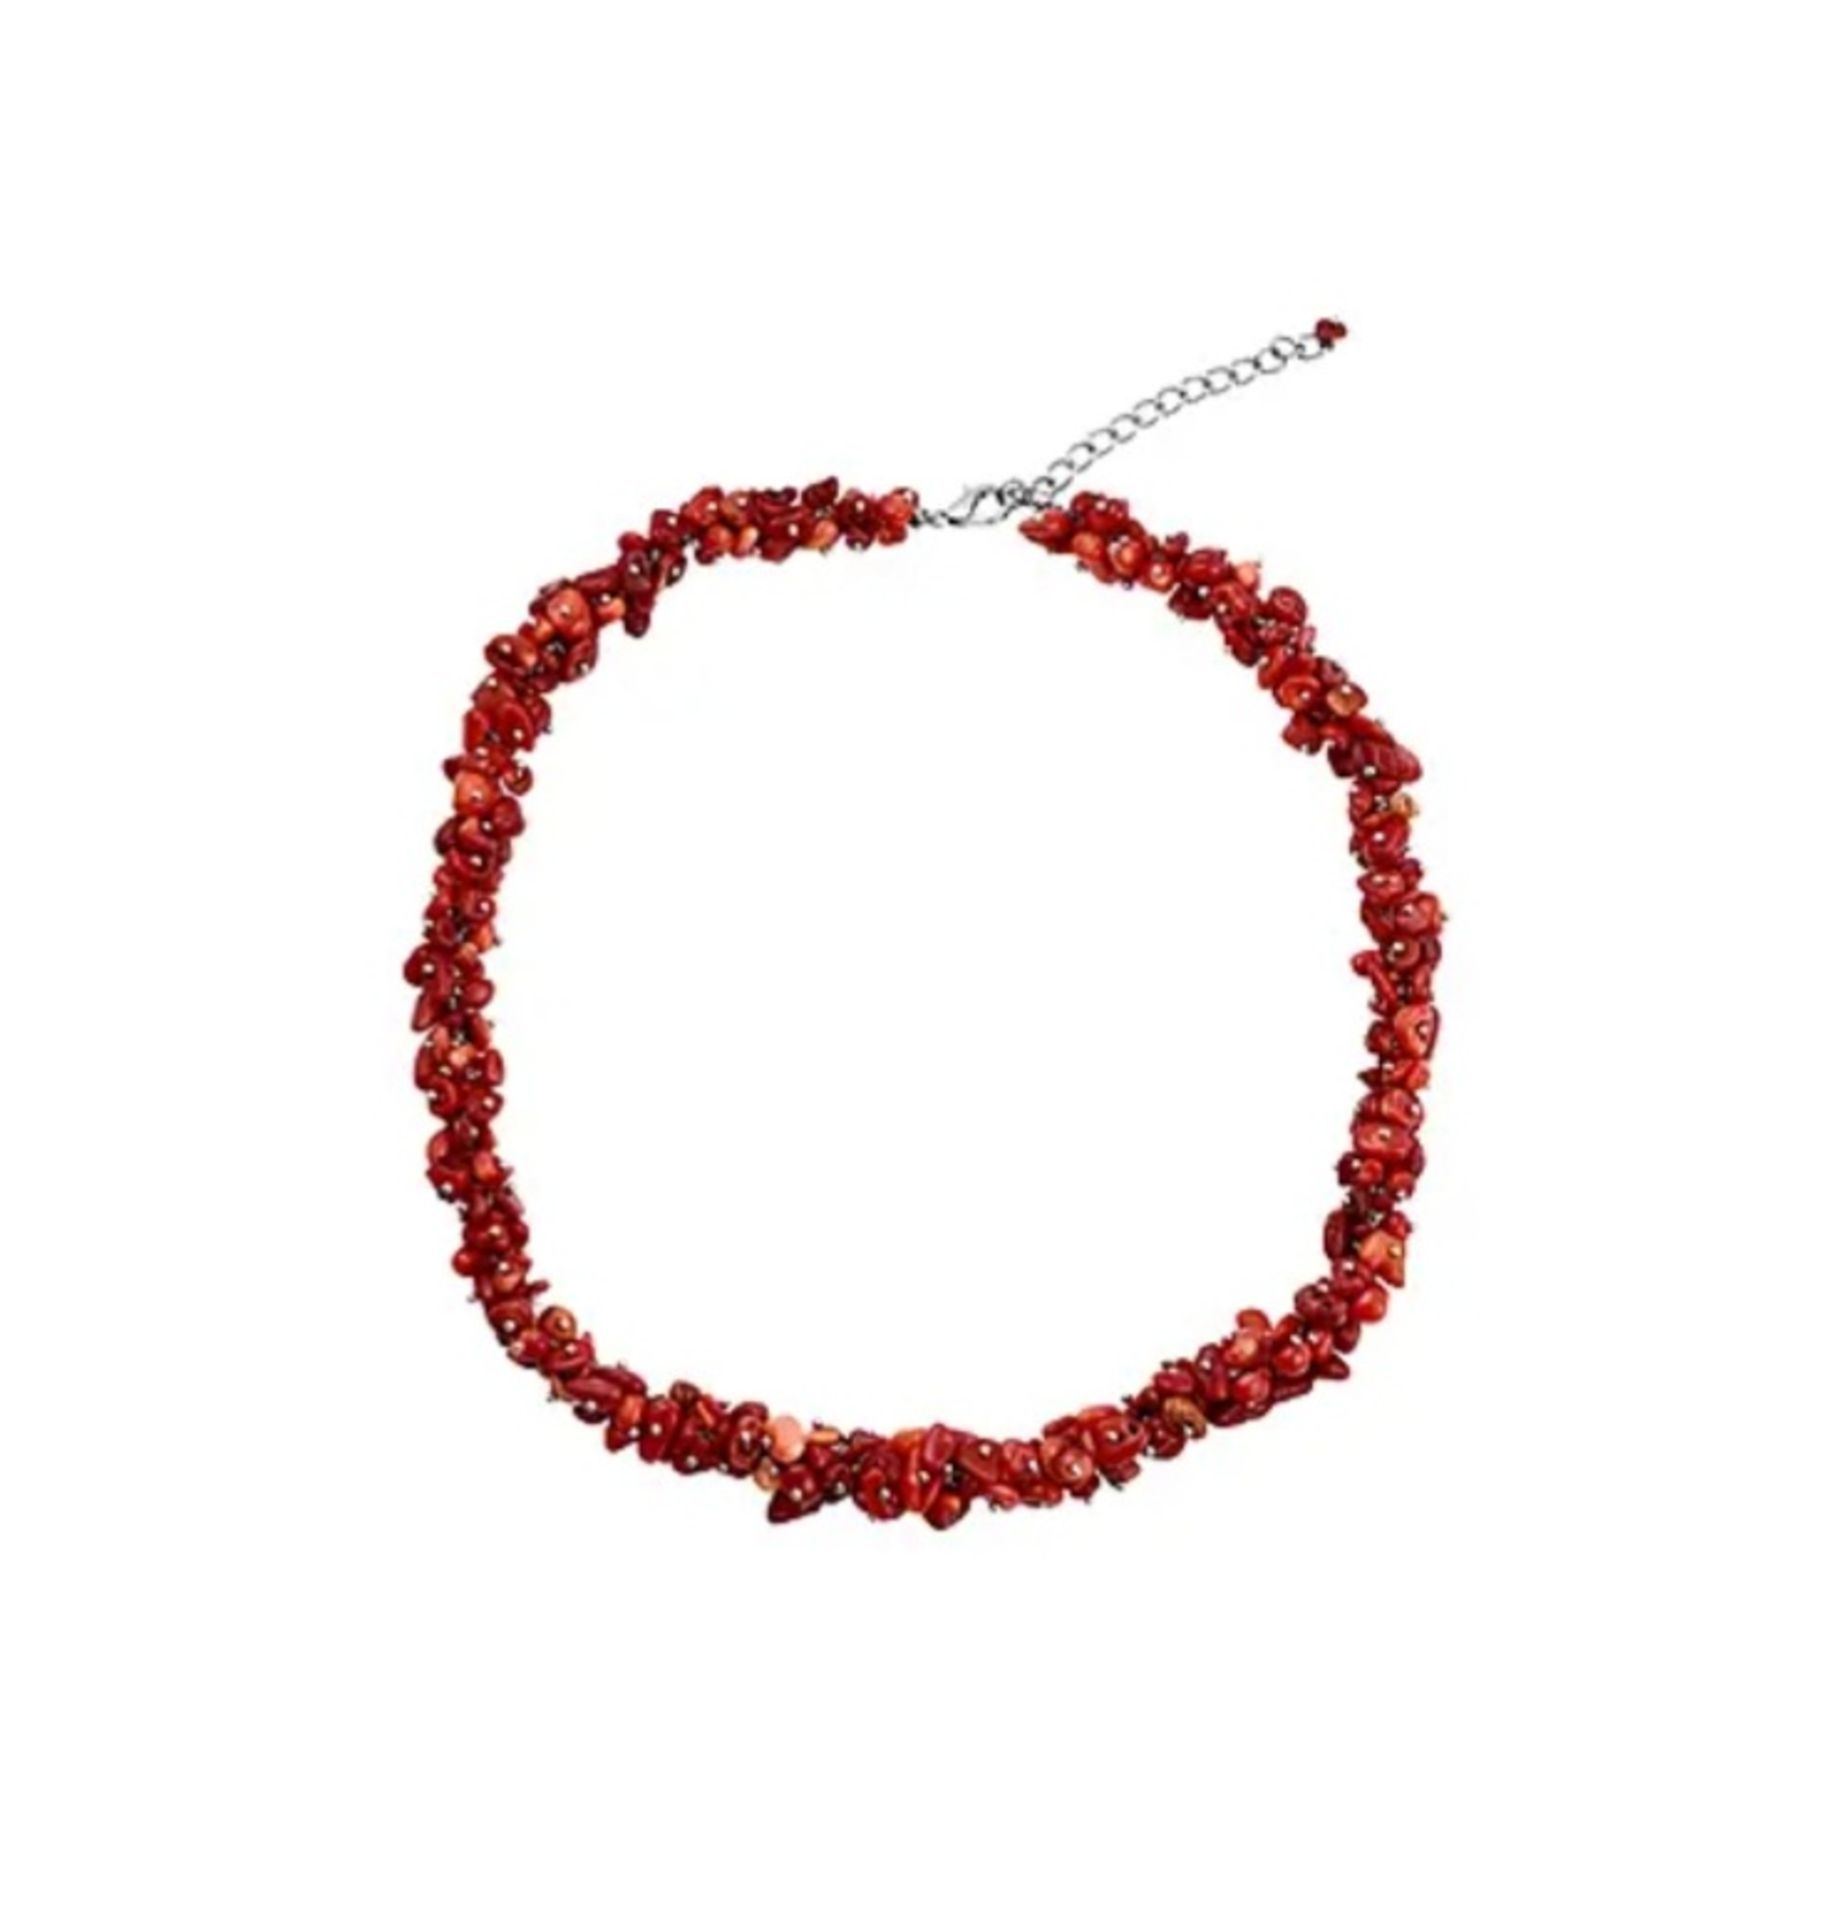 NEW! Coral Necklace in Silver Tone - Image 2 of 4